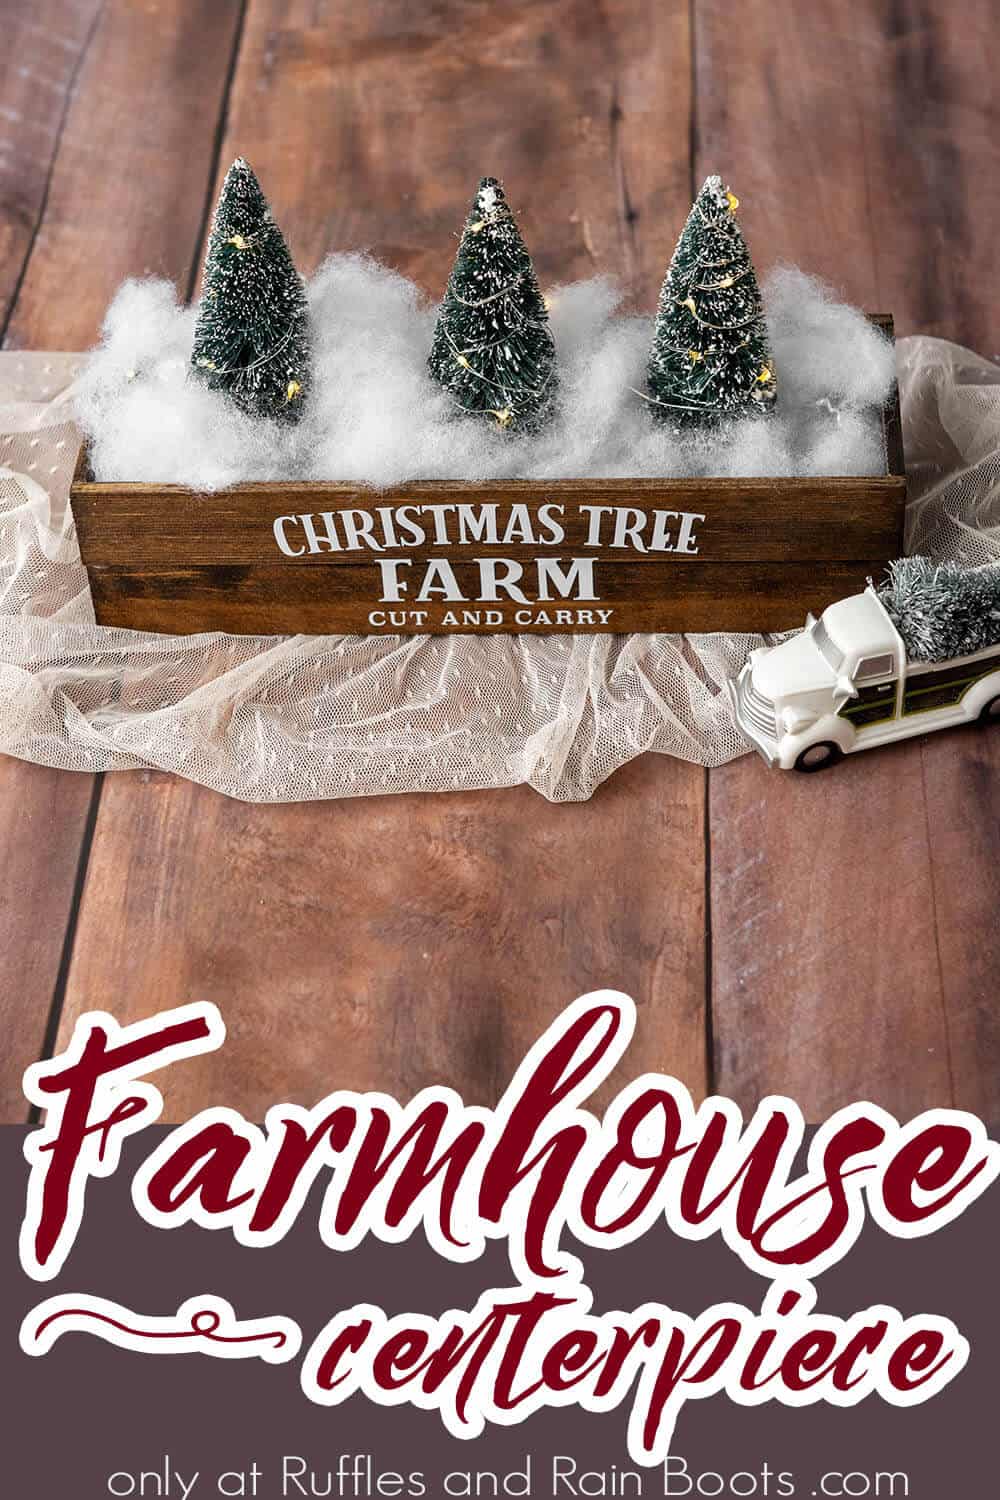 Beautiful farmhouse centerpiece with text which reads Christmas tree farm cut and carry on the stained wooden box.